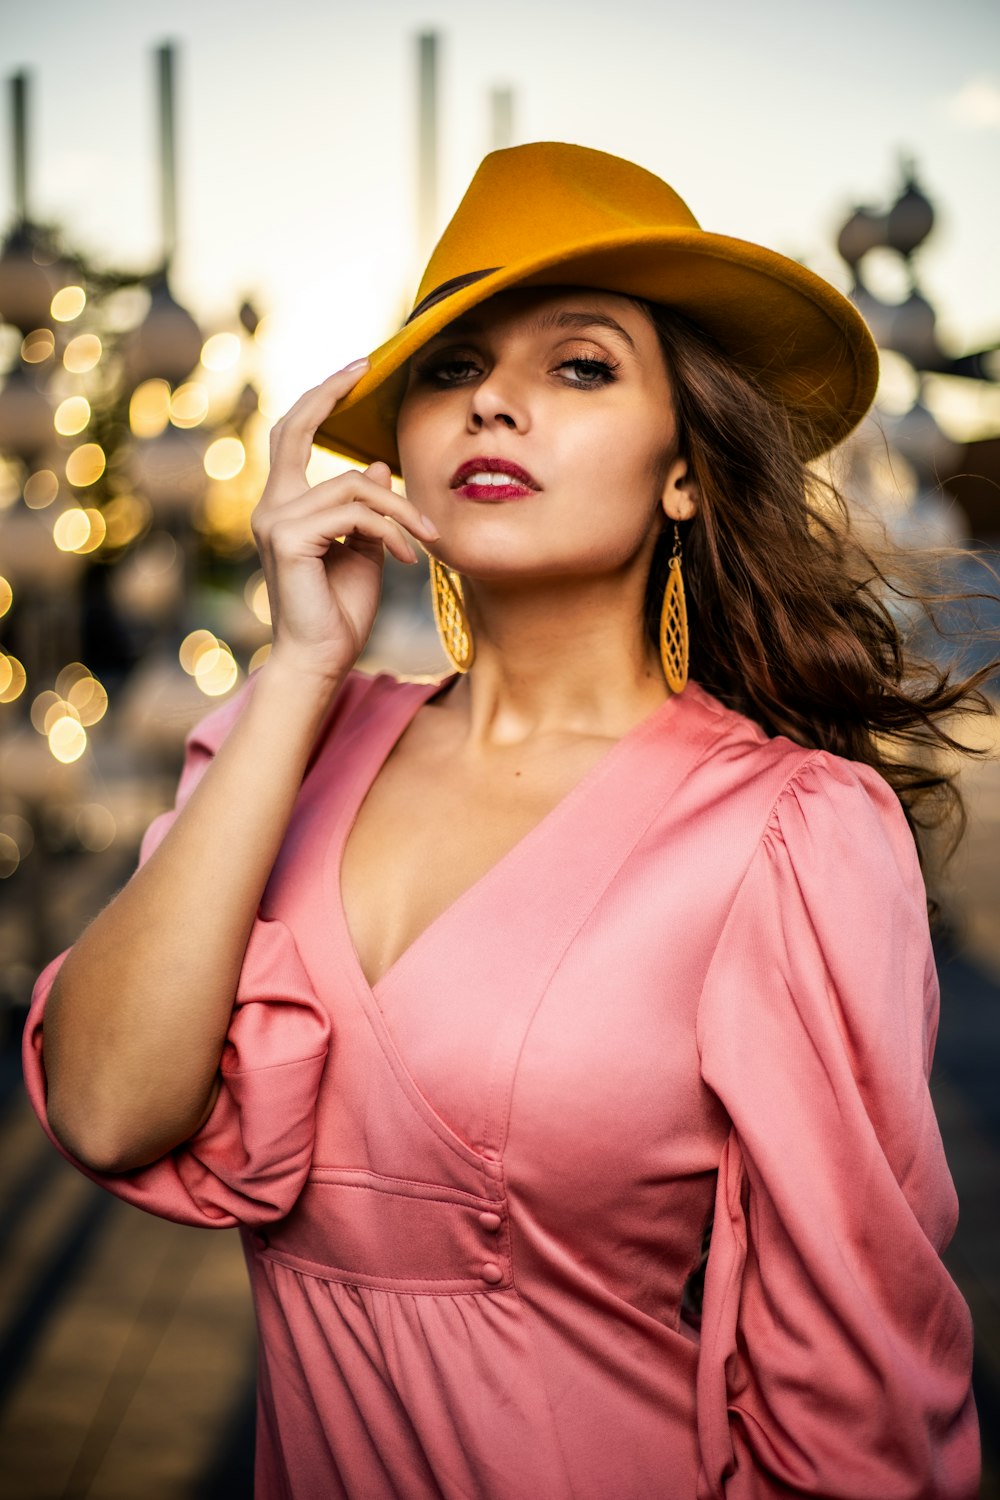 woman in pink v neck shirt wearing brown hat